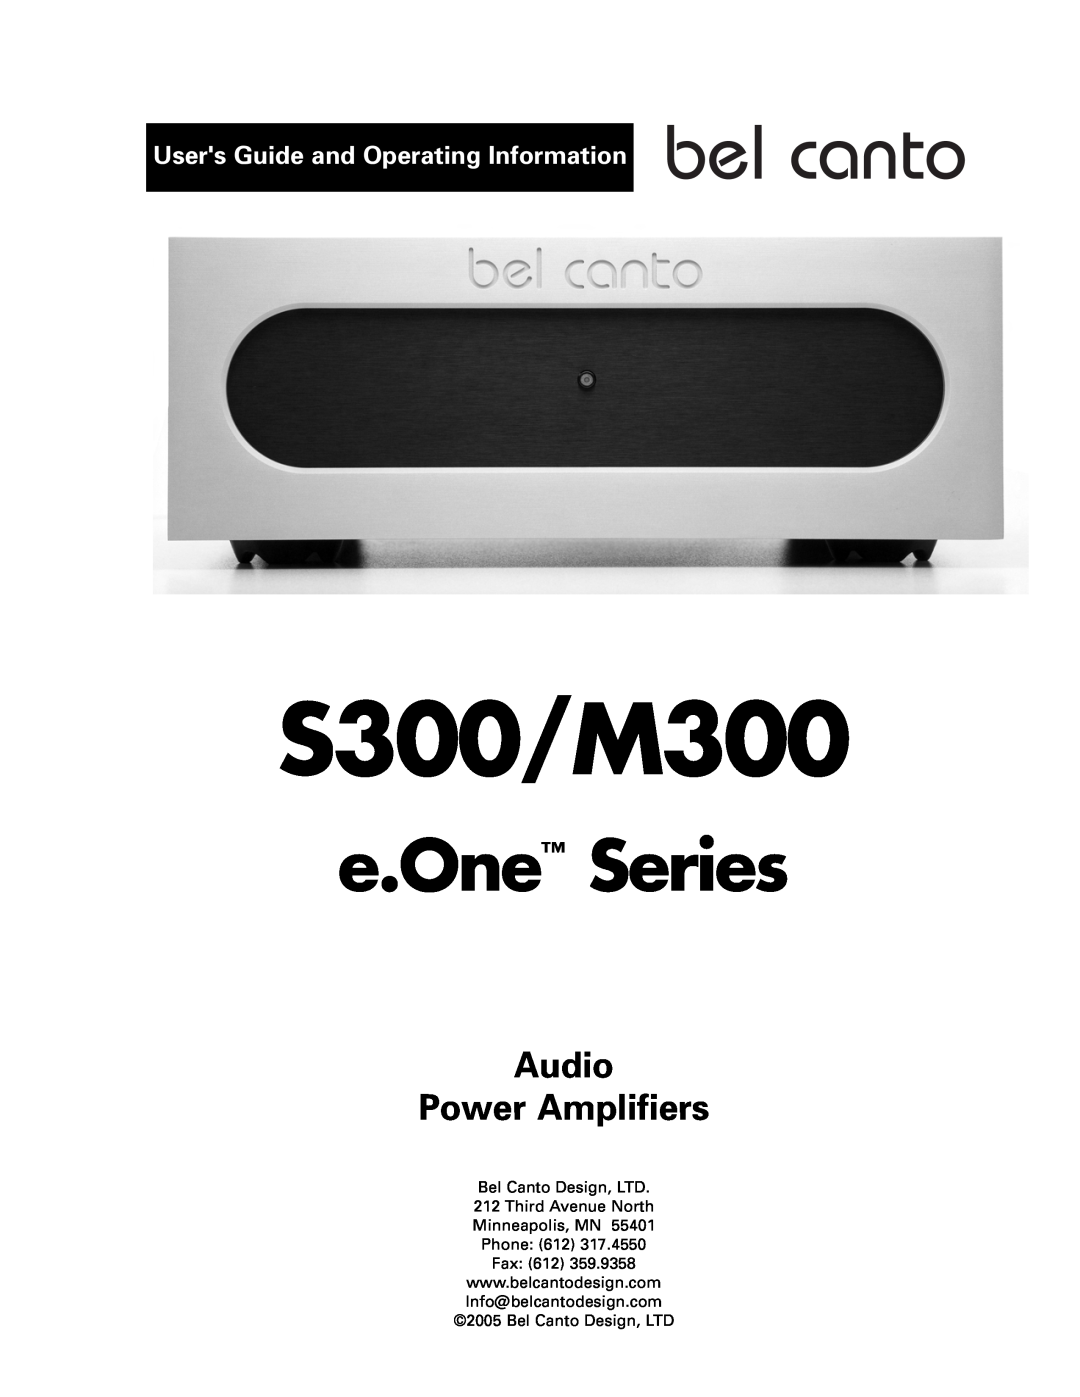 Bel Canto Design manual S300/M300, Users Guide and Operating Information, e.One Series, Audio Power Amplifiers 